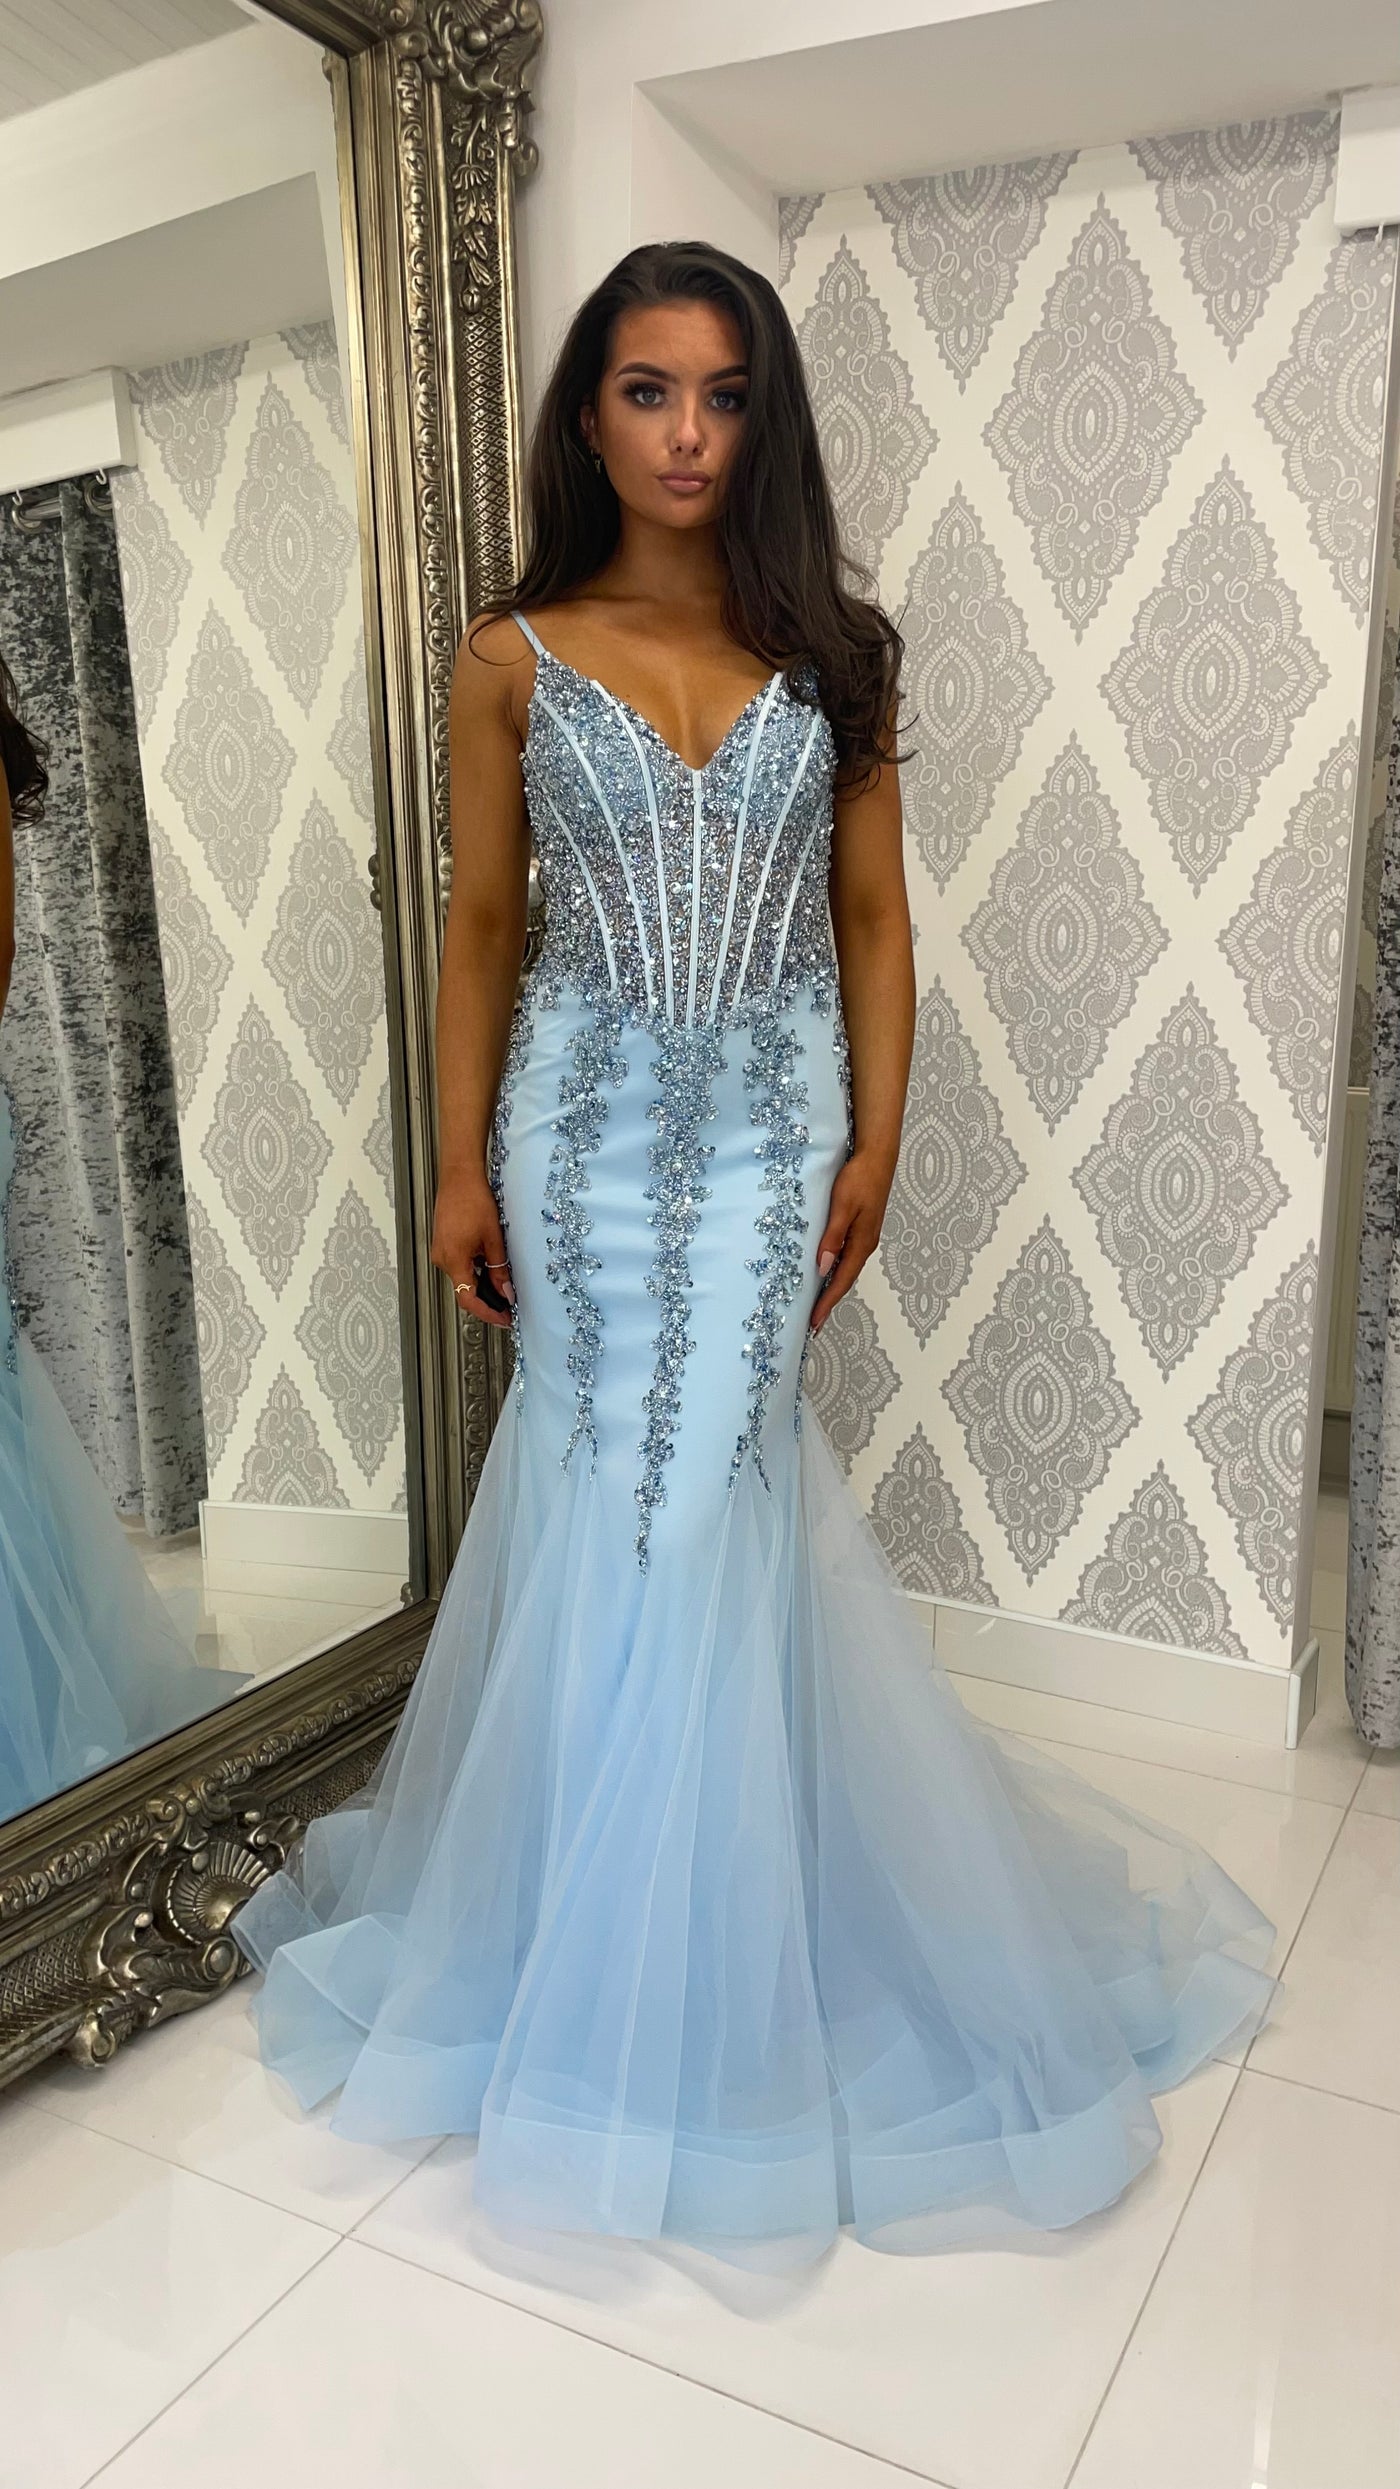 Baby Blue Corset Style Fishtail Full Length Gown